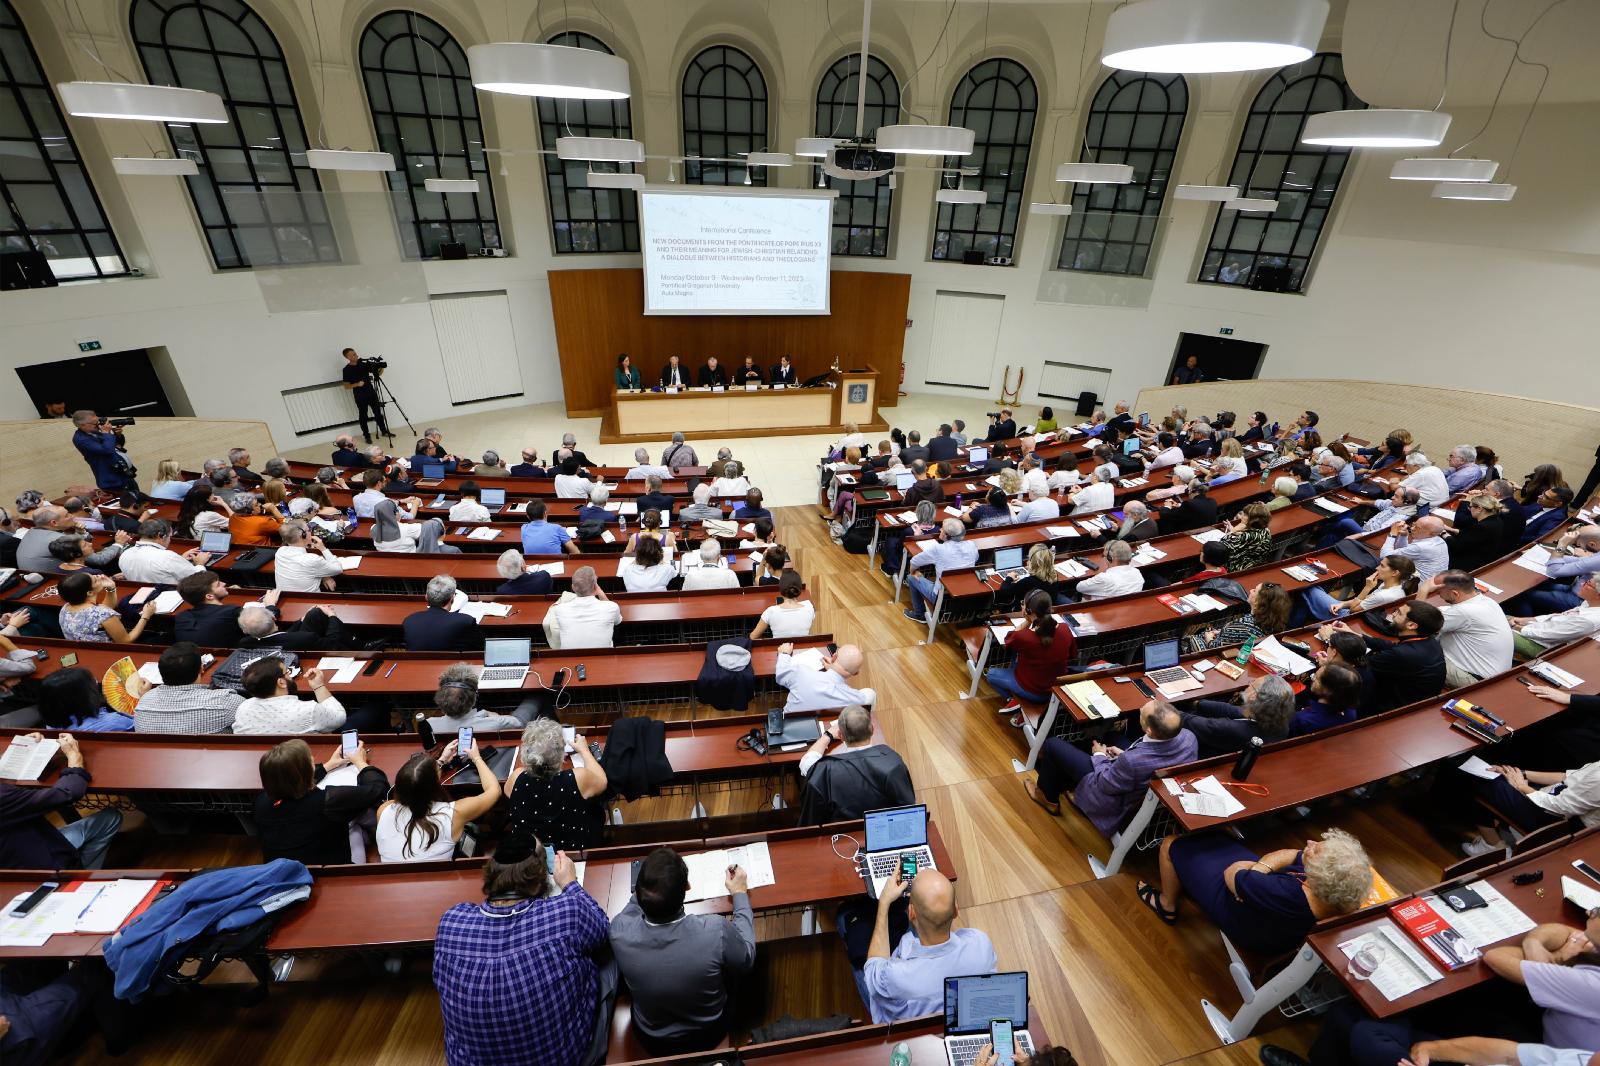 Conference at the Pontifical Gregorian University